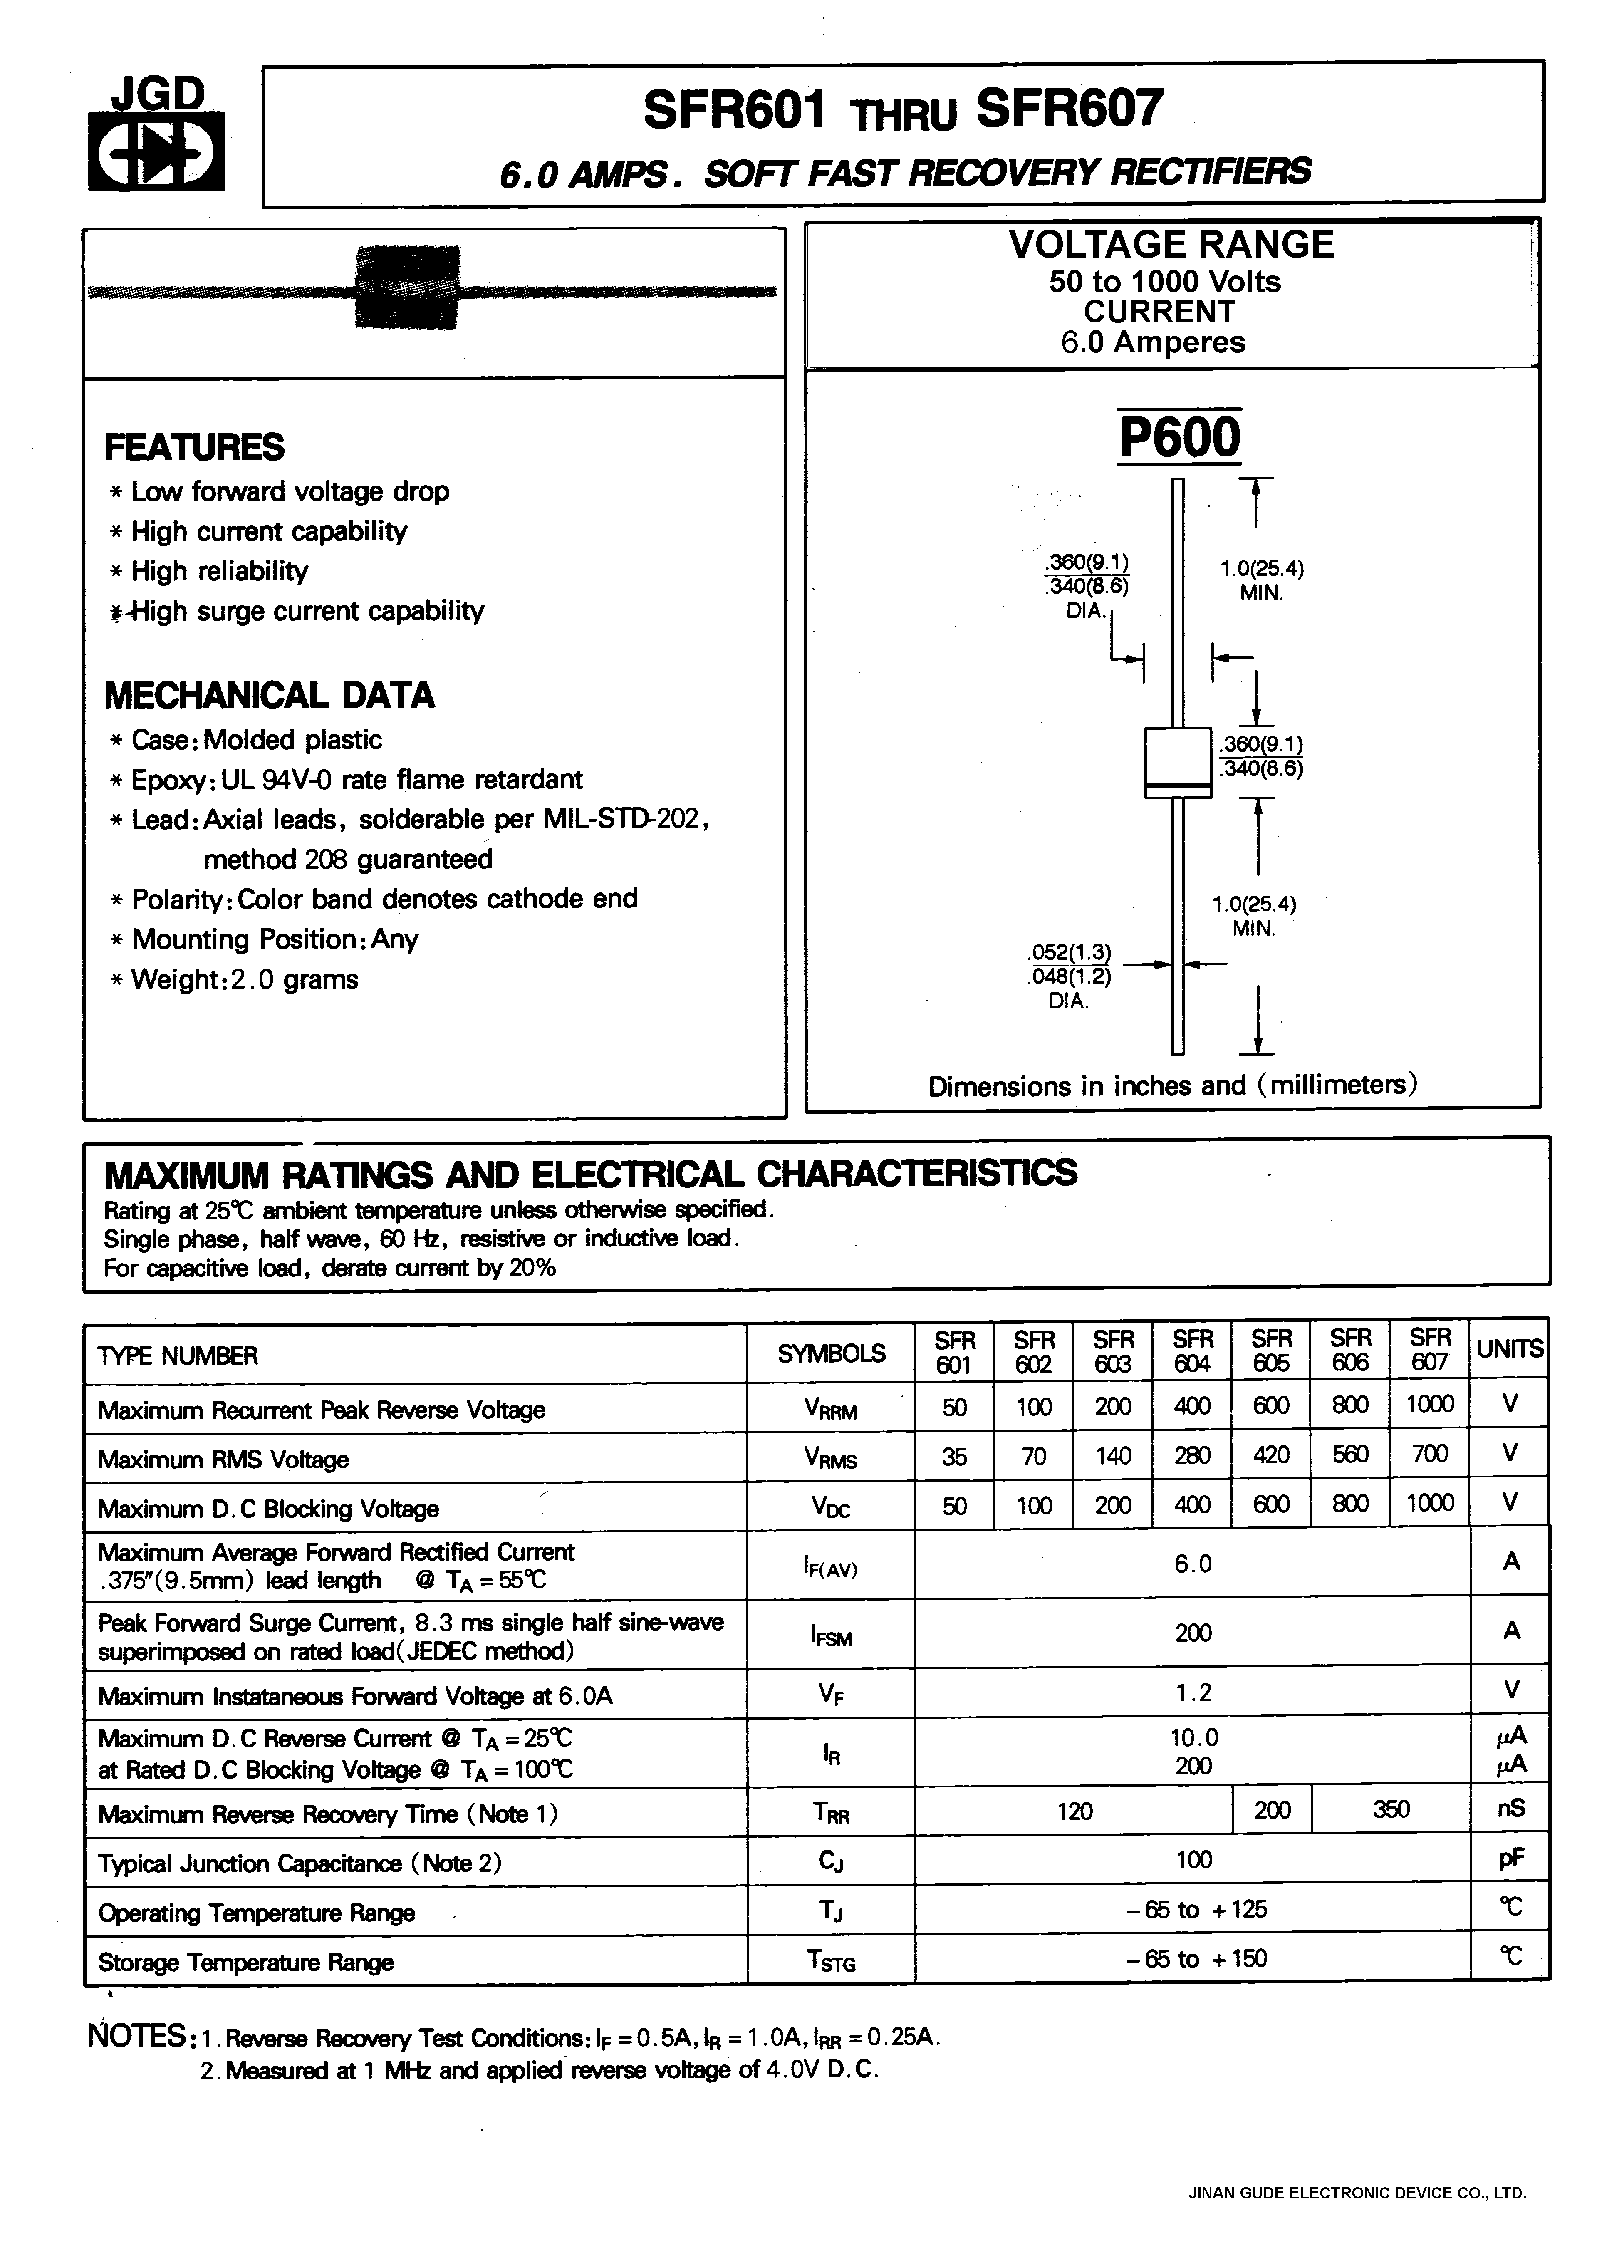 Datasheet SFR603 - 6.0 AMPS. SOFT FAST RECOVERY RECTIFIERS page 1